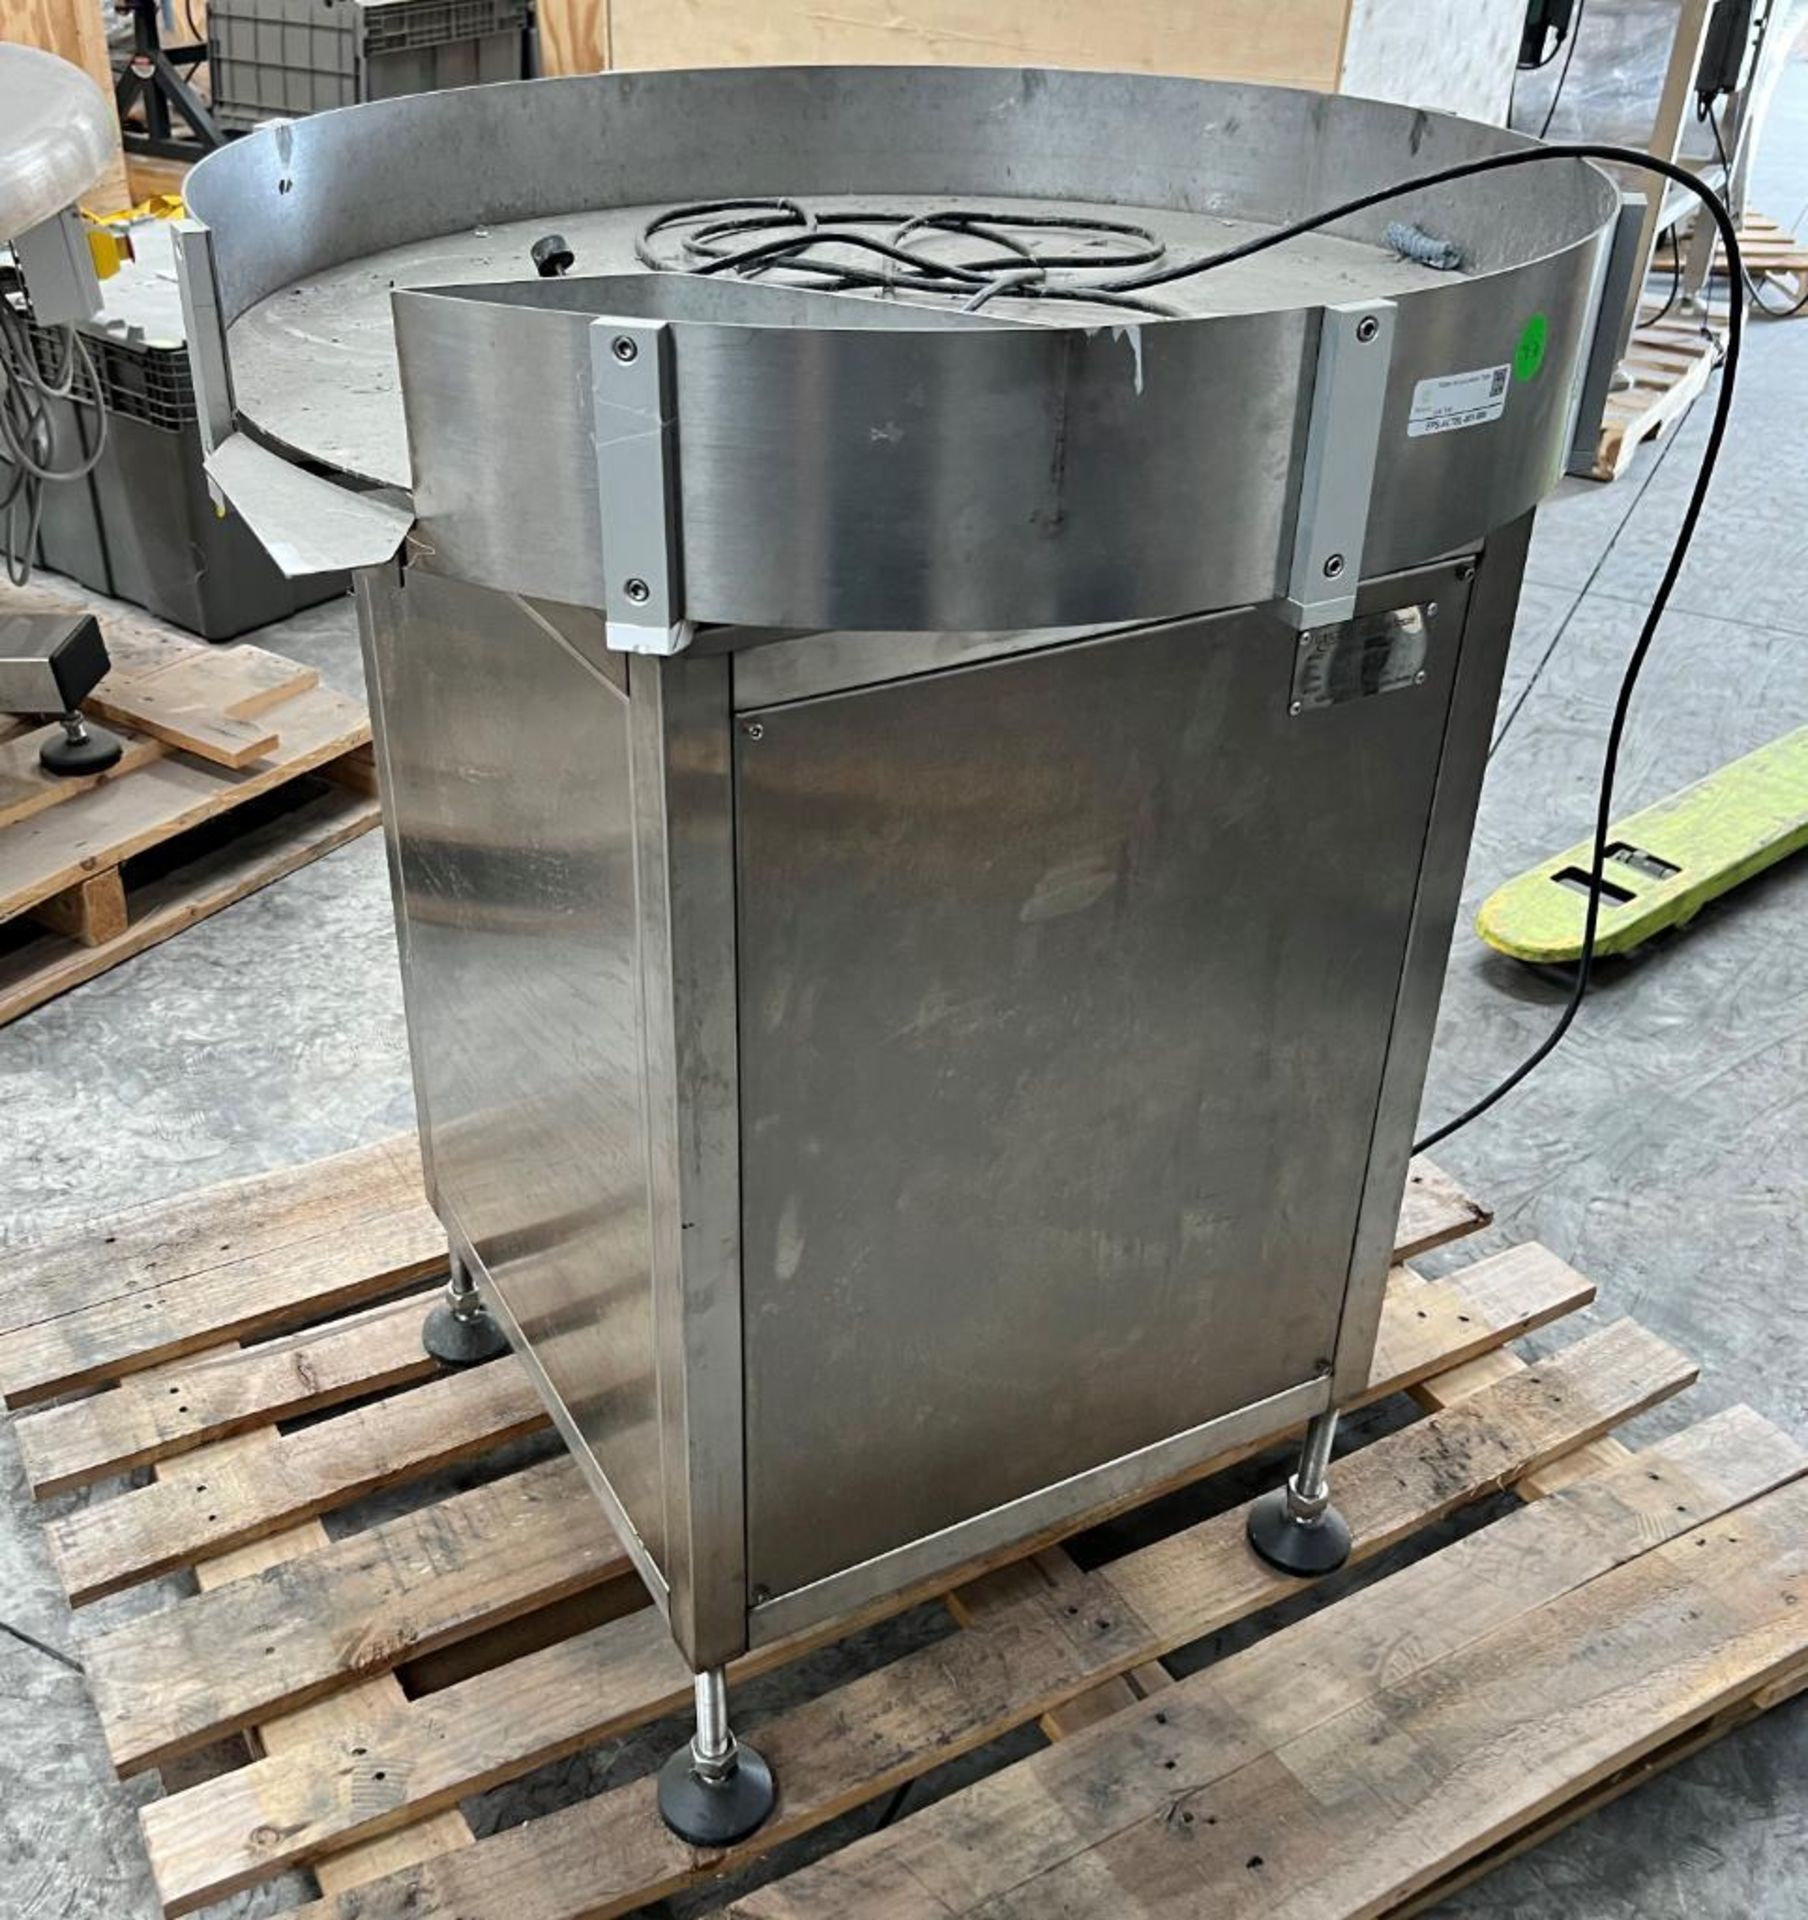 Excel Packaging Stainless Steel Accumulation Table, Model PP-800AT-SS, Serial# 530. Approximate 31"